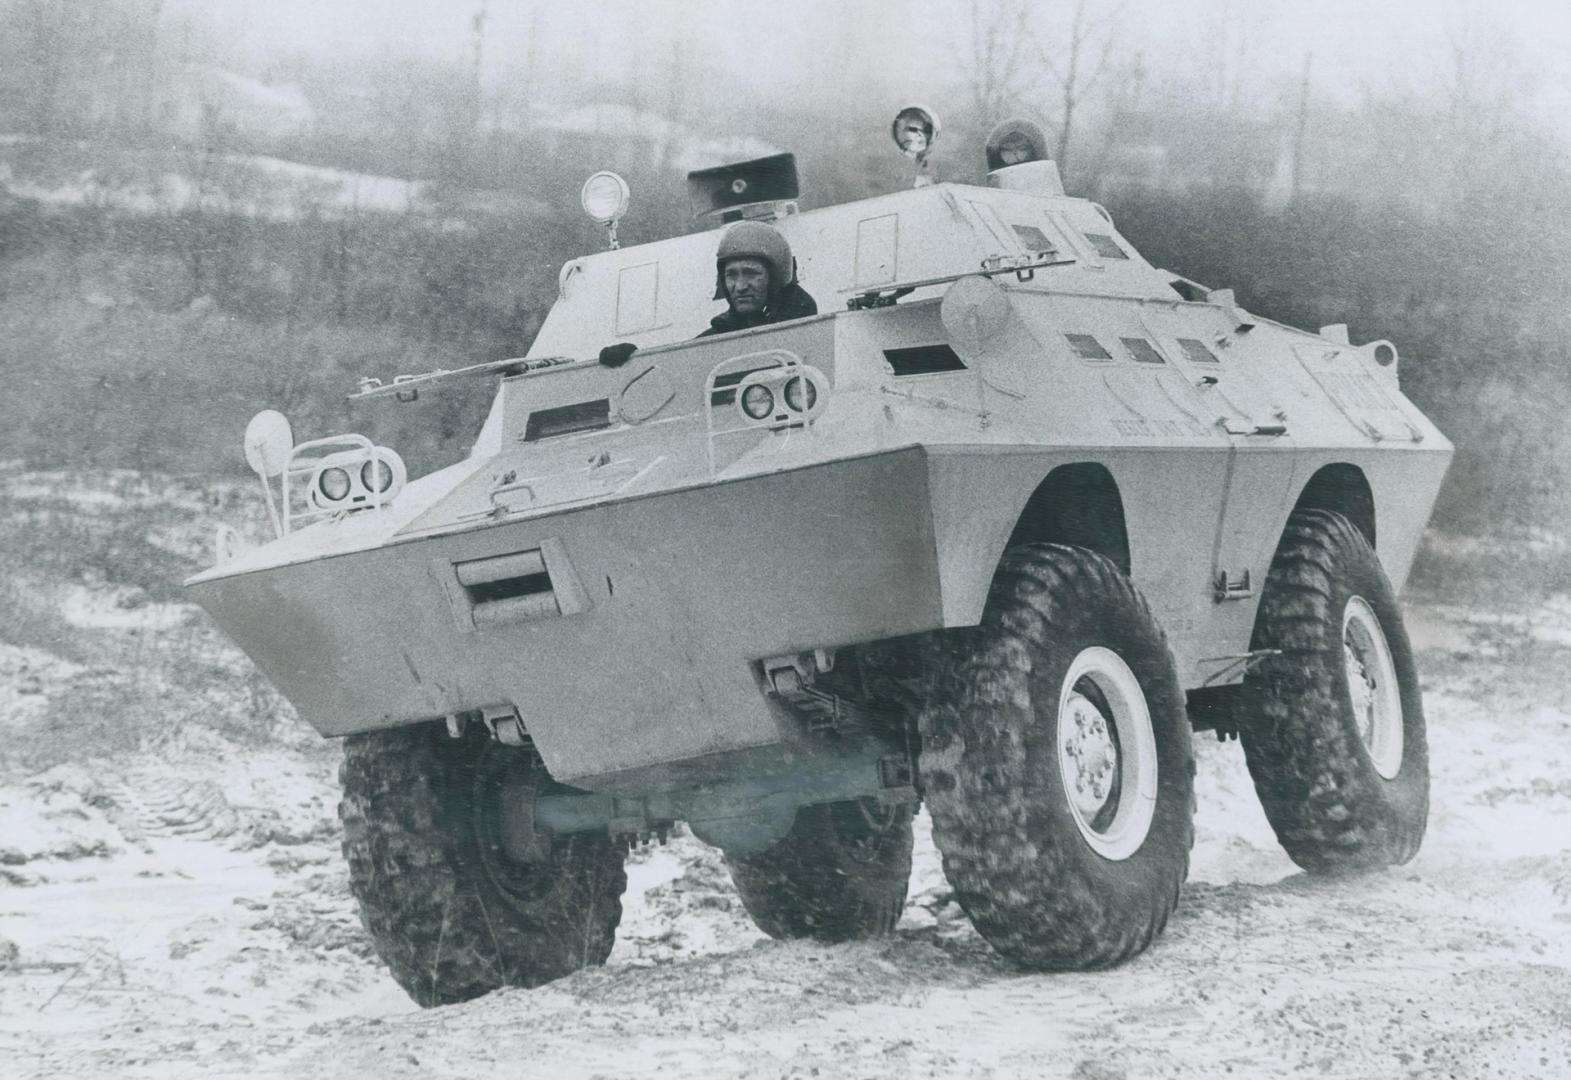 This is the commando armored car, used in Viet Nam, sought after in the U